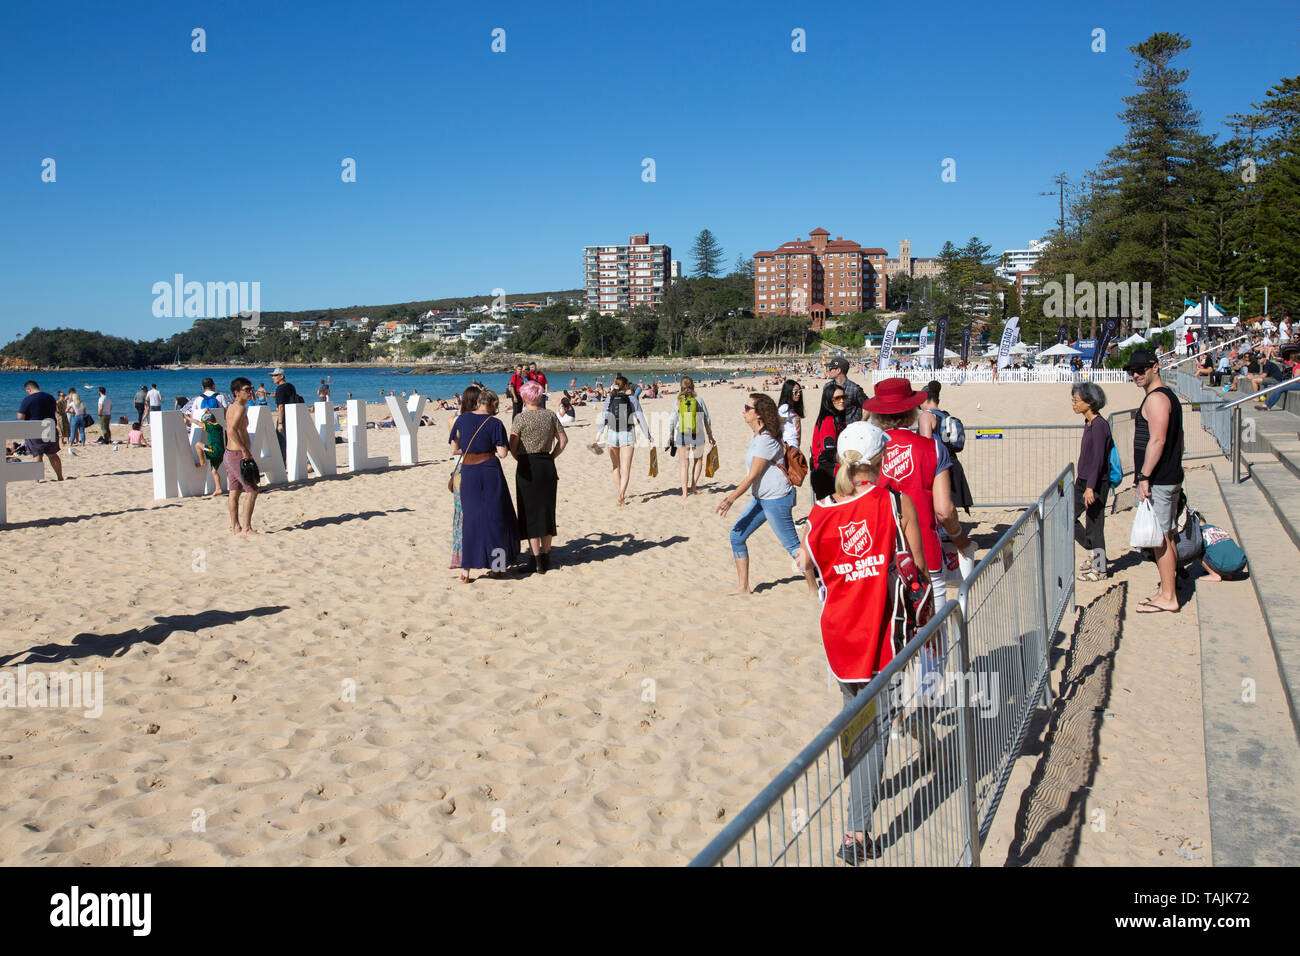 Salvation army volunteers fund raising on Manly beach during taste of Manly festival,Sydney,Australia Stock Photo